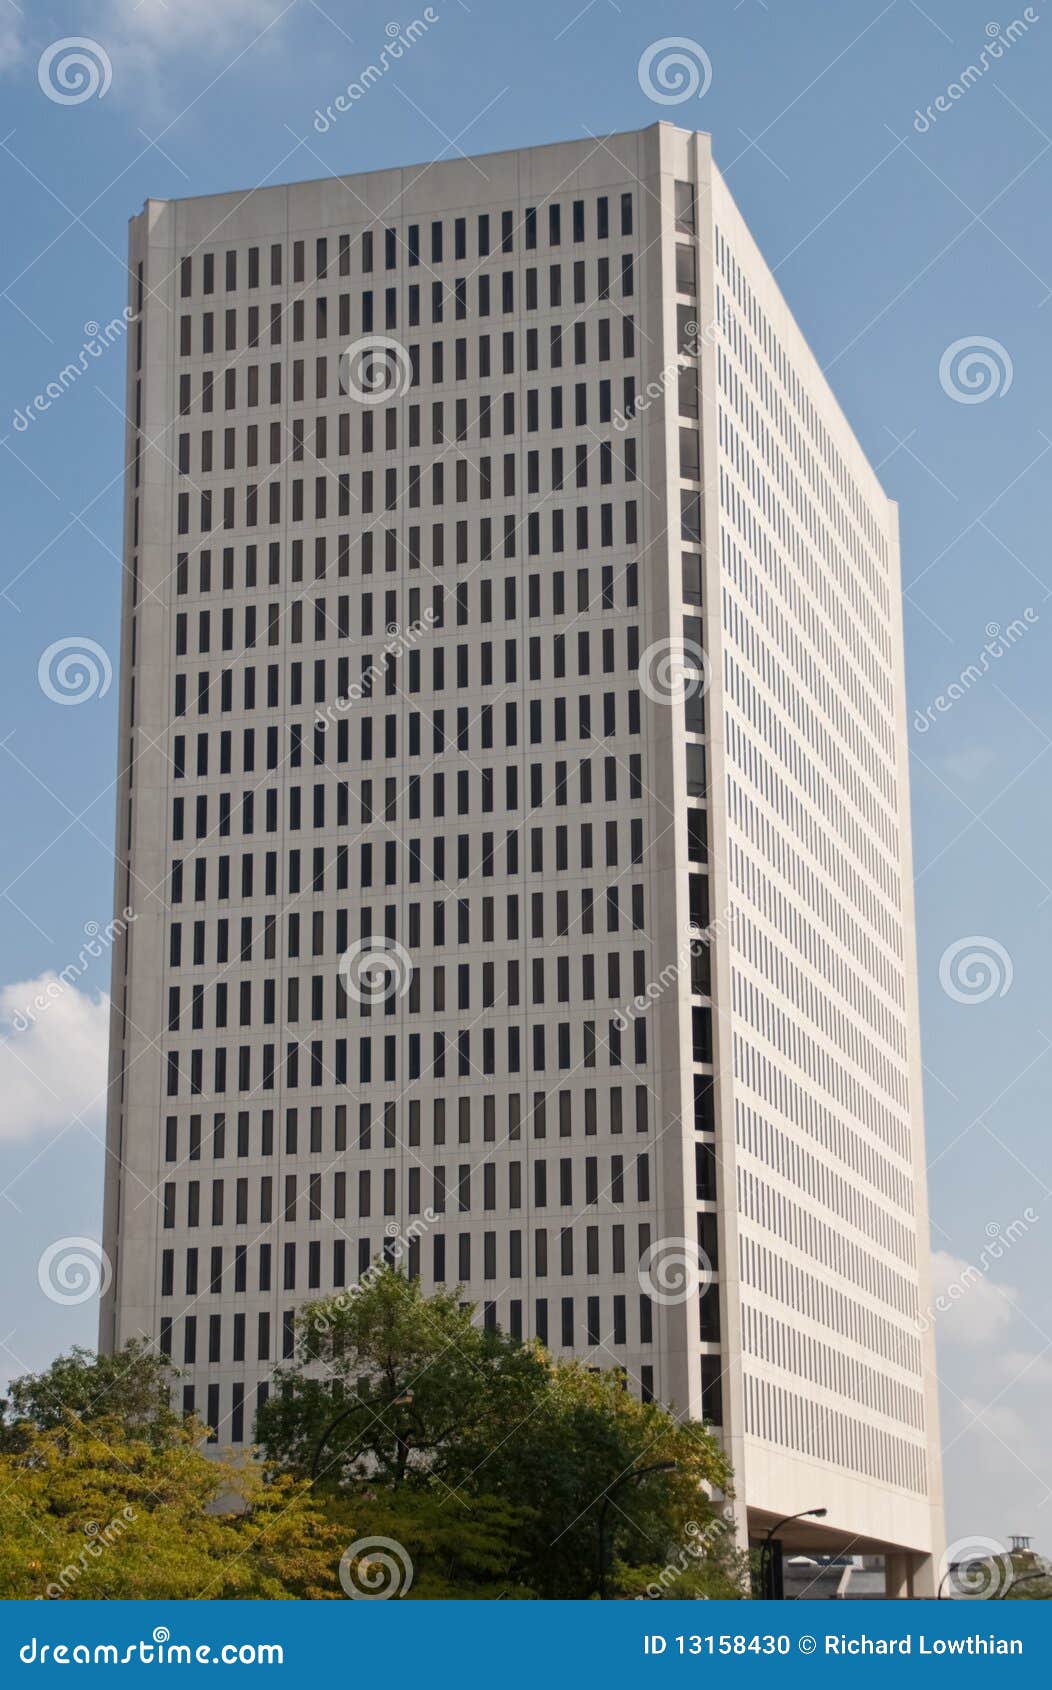 Tall City Building stock photo. Image of blue, highrise - 13158430